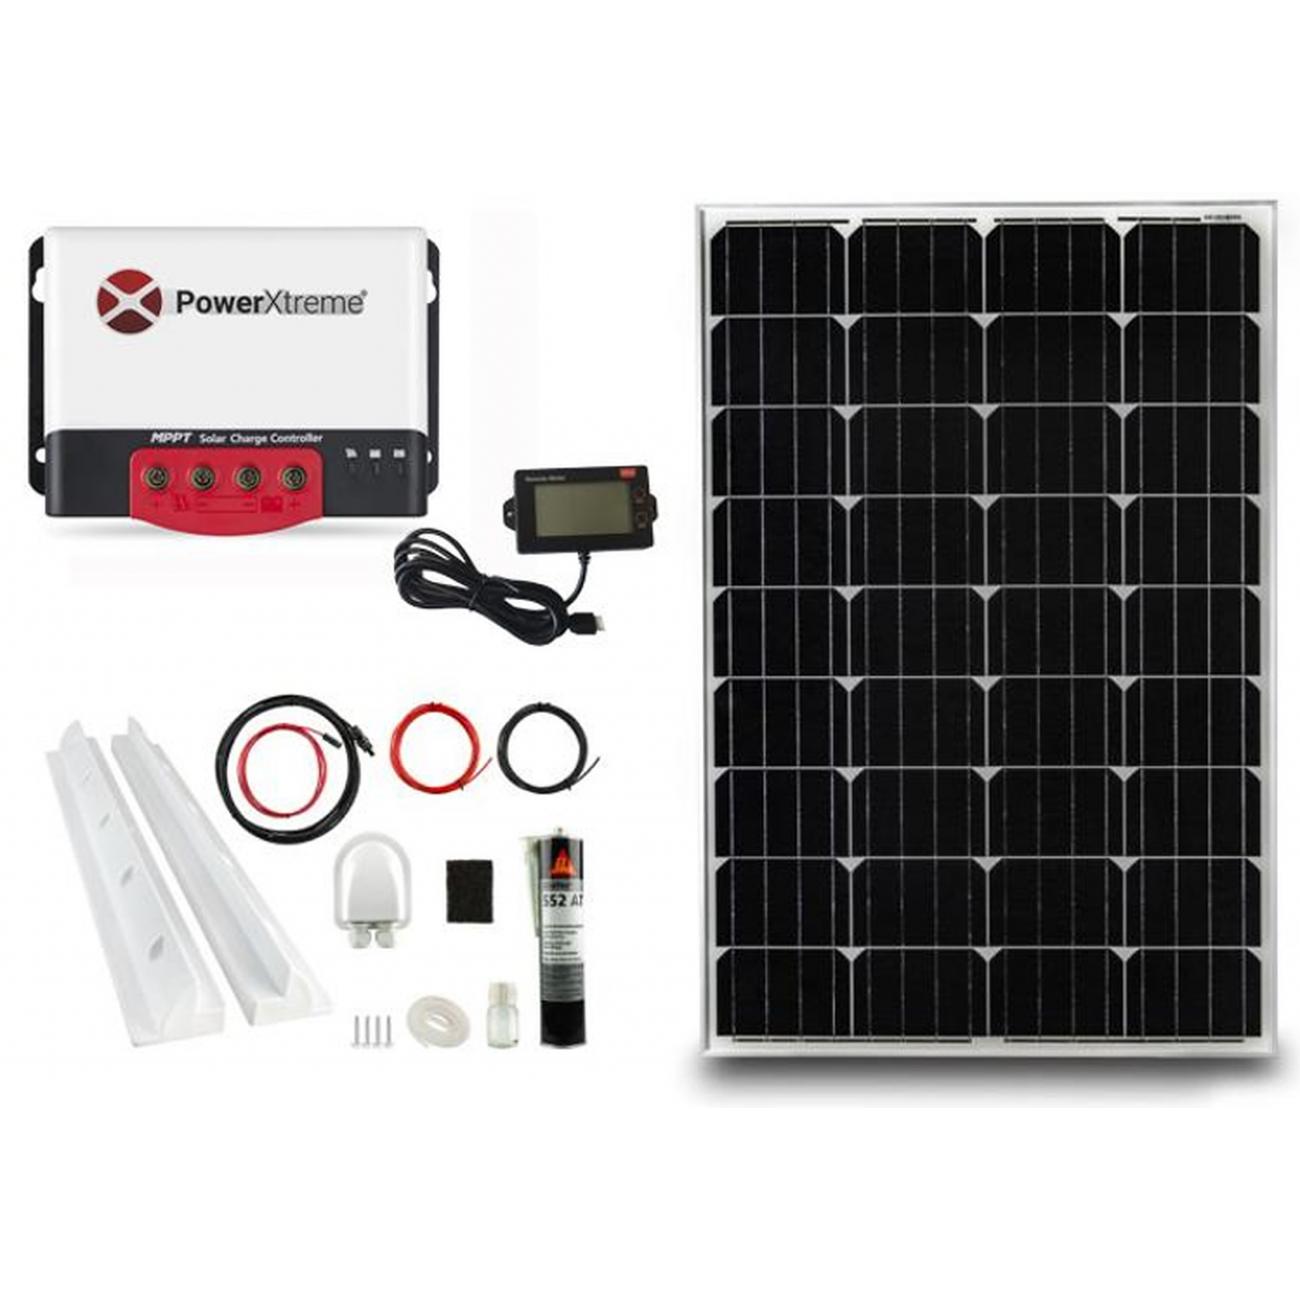 PowerXtreme XS20s Solar MPPT With Display 260W Package